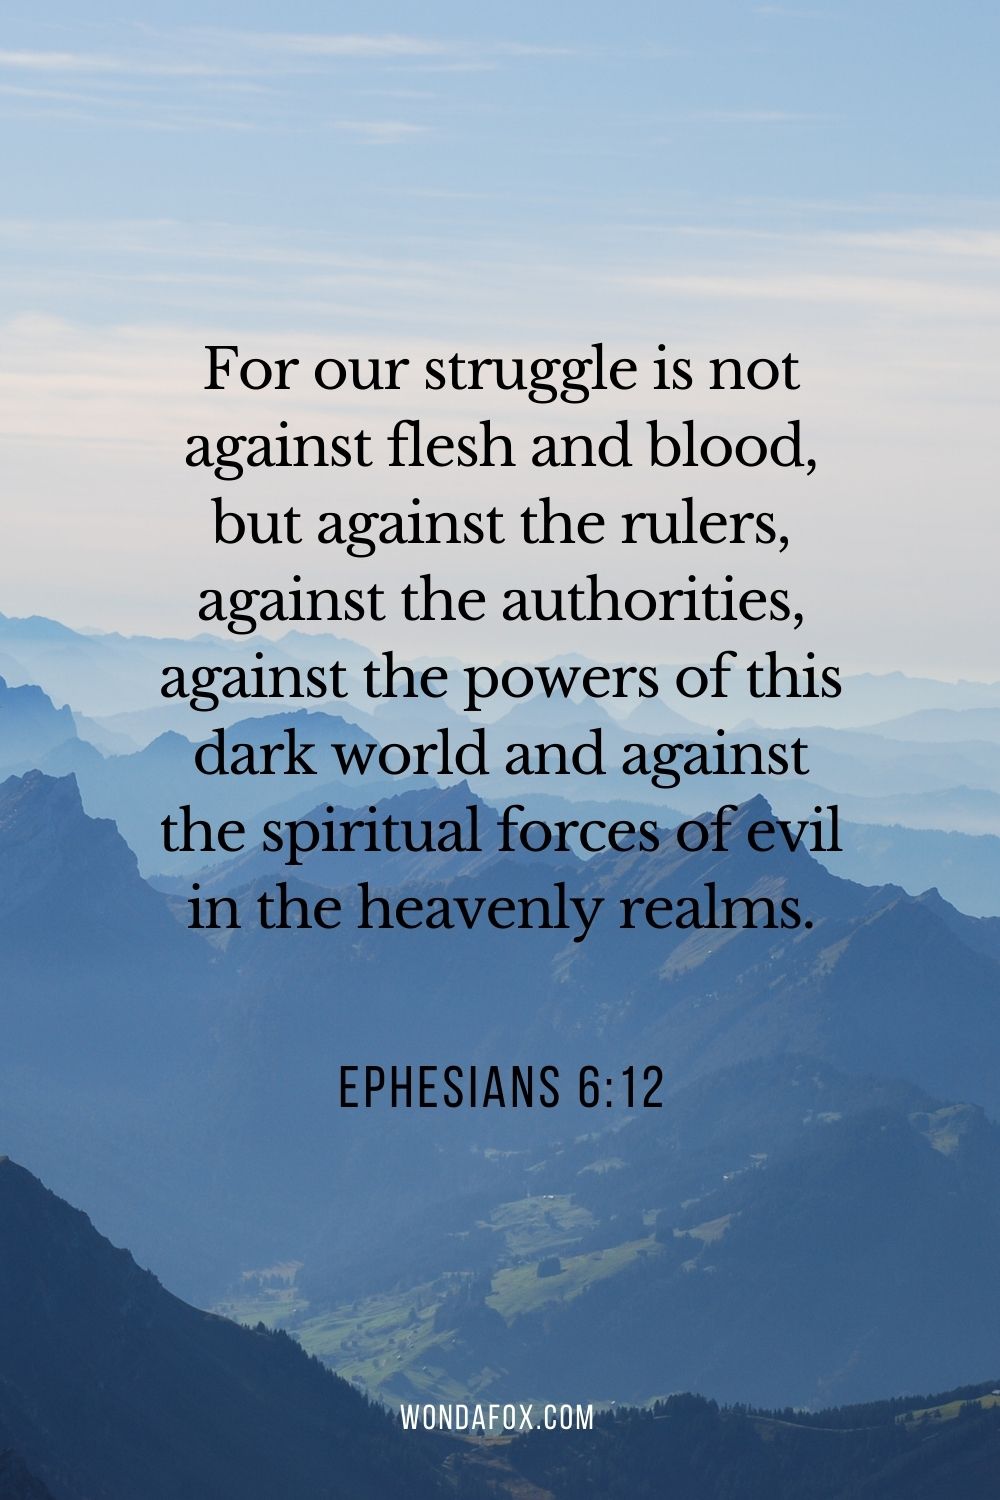 For our struggle is not against flesh and blood, but against the rulers, against the authorities, against the powers of this dark world and against the spiritual forces of evil in the heavenly realms.